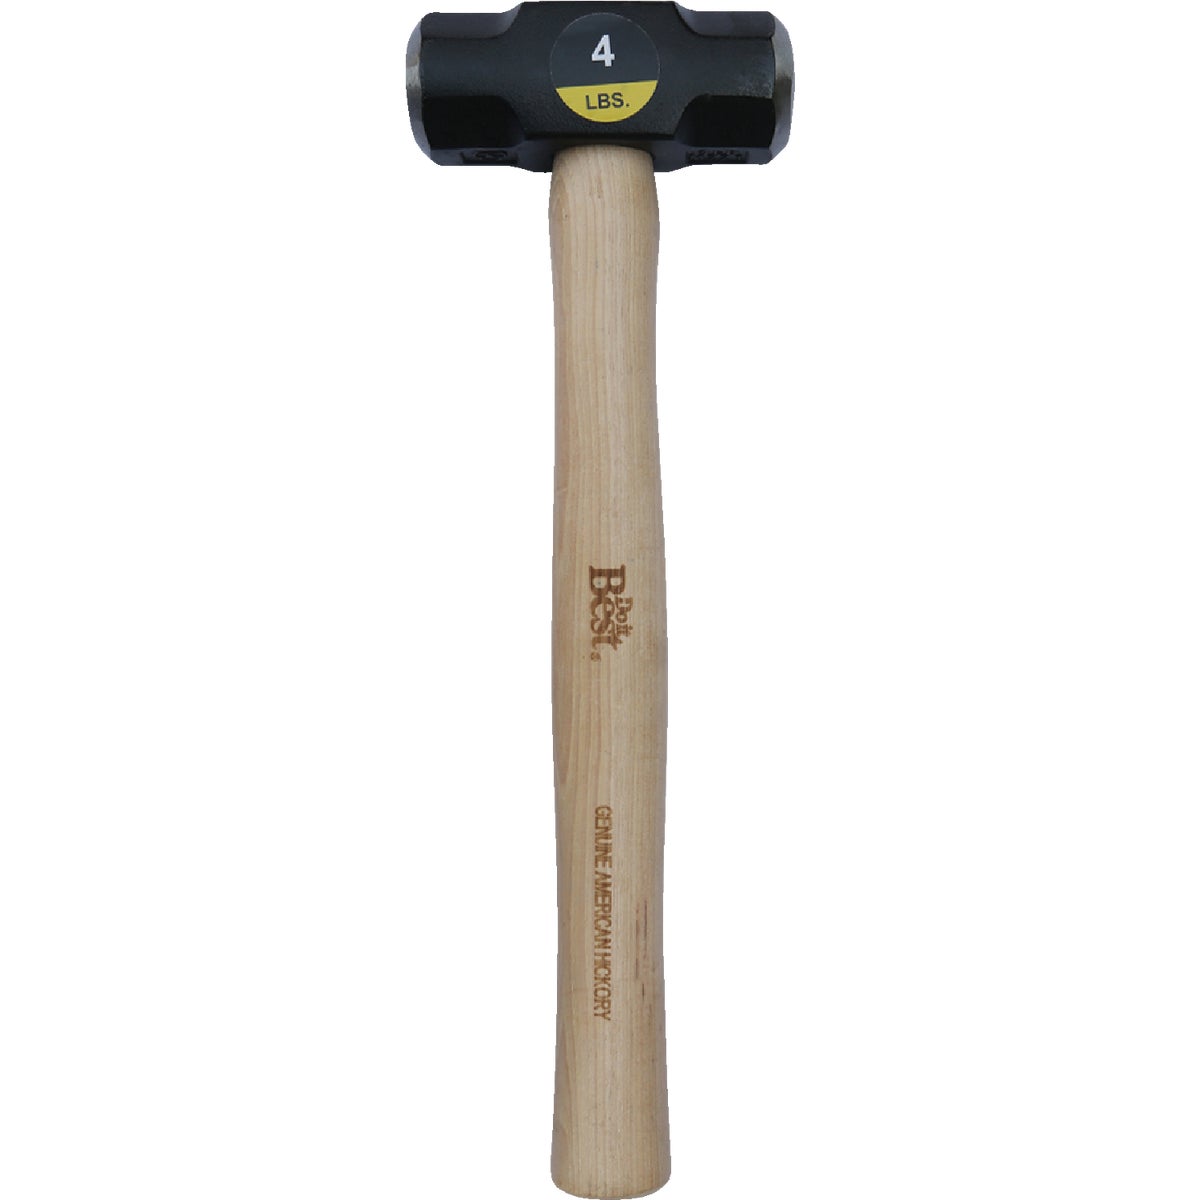 Do it Best 4 Lb. Steel Double Face Drilling Hammer with Hickory Handle